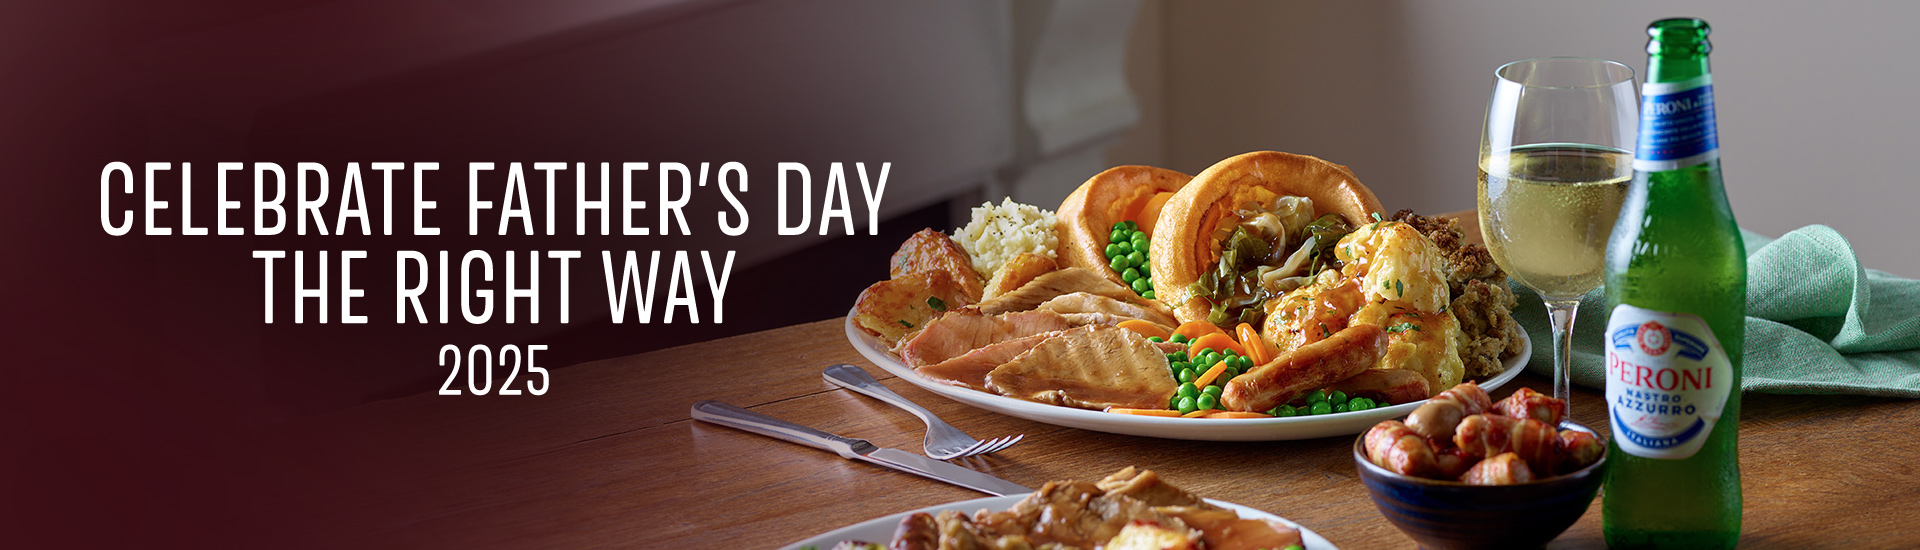 Father’s day carvery in Ipswich